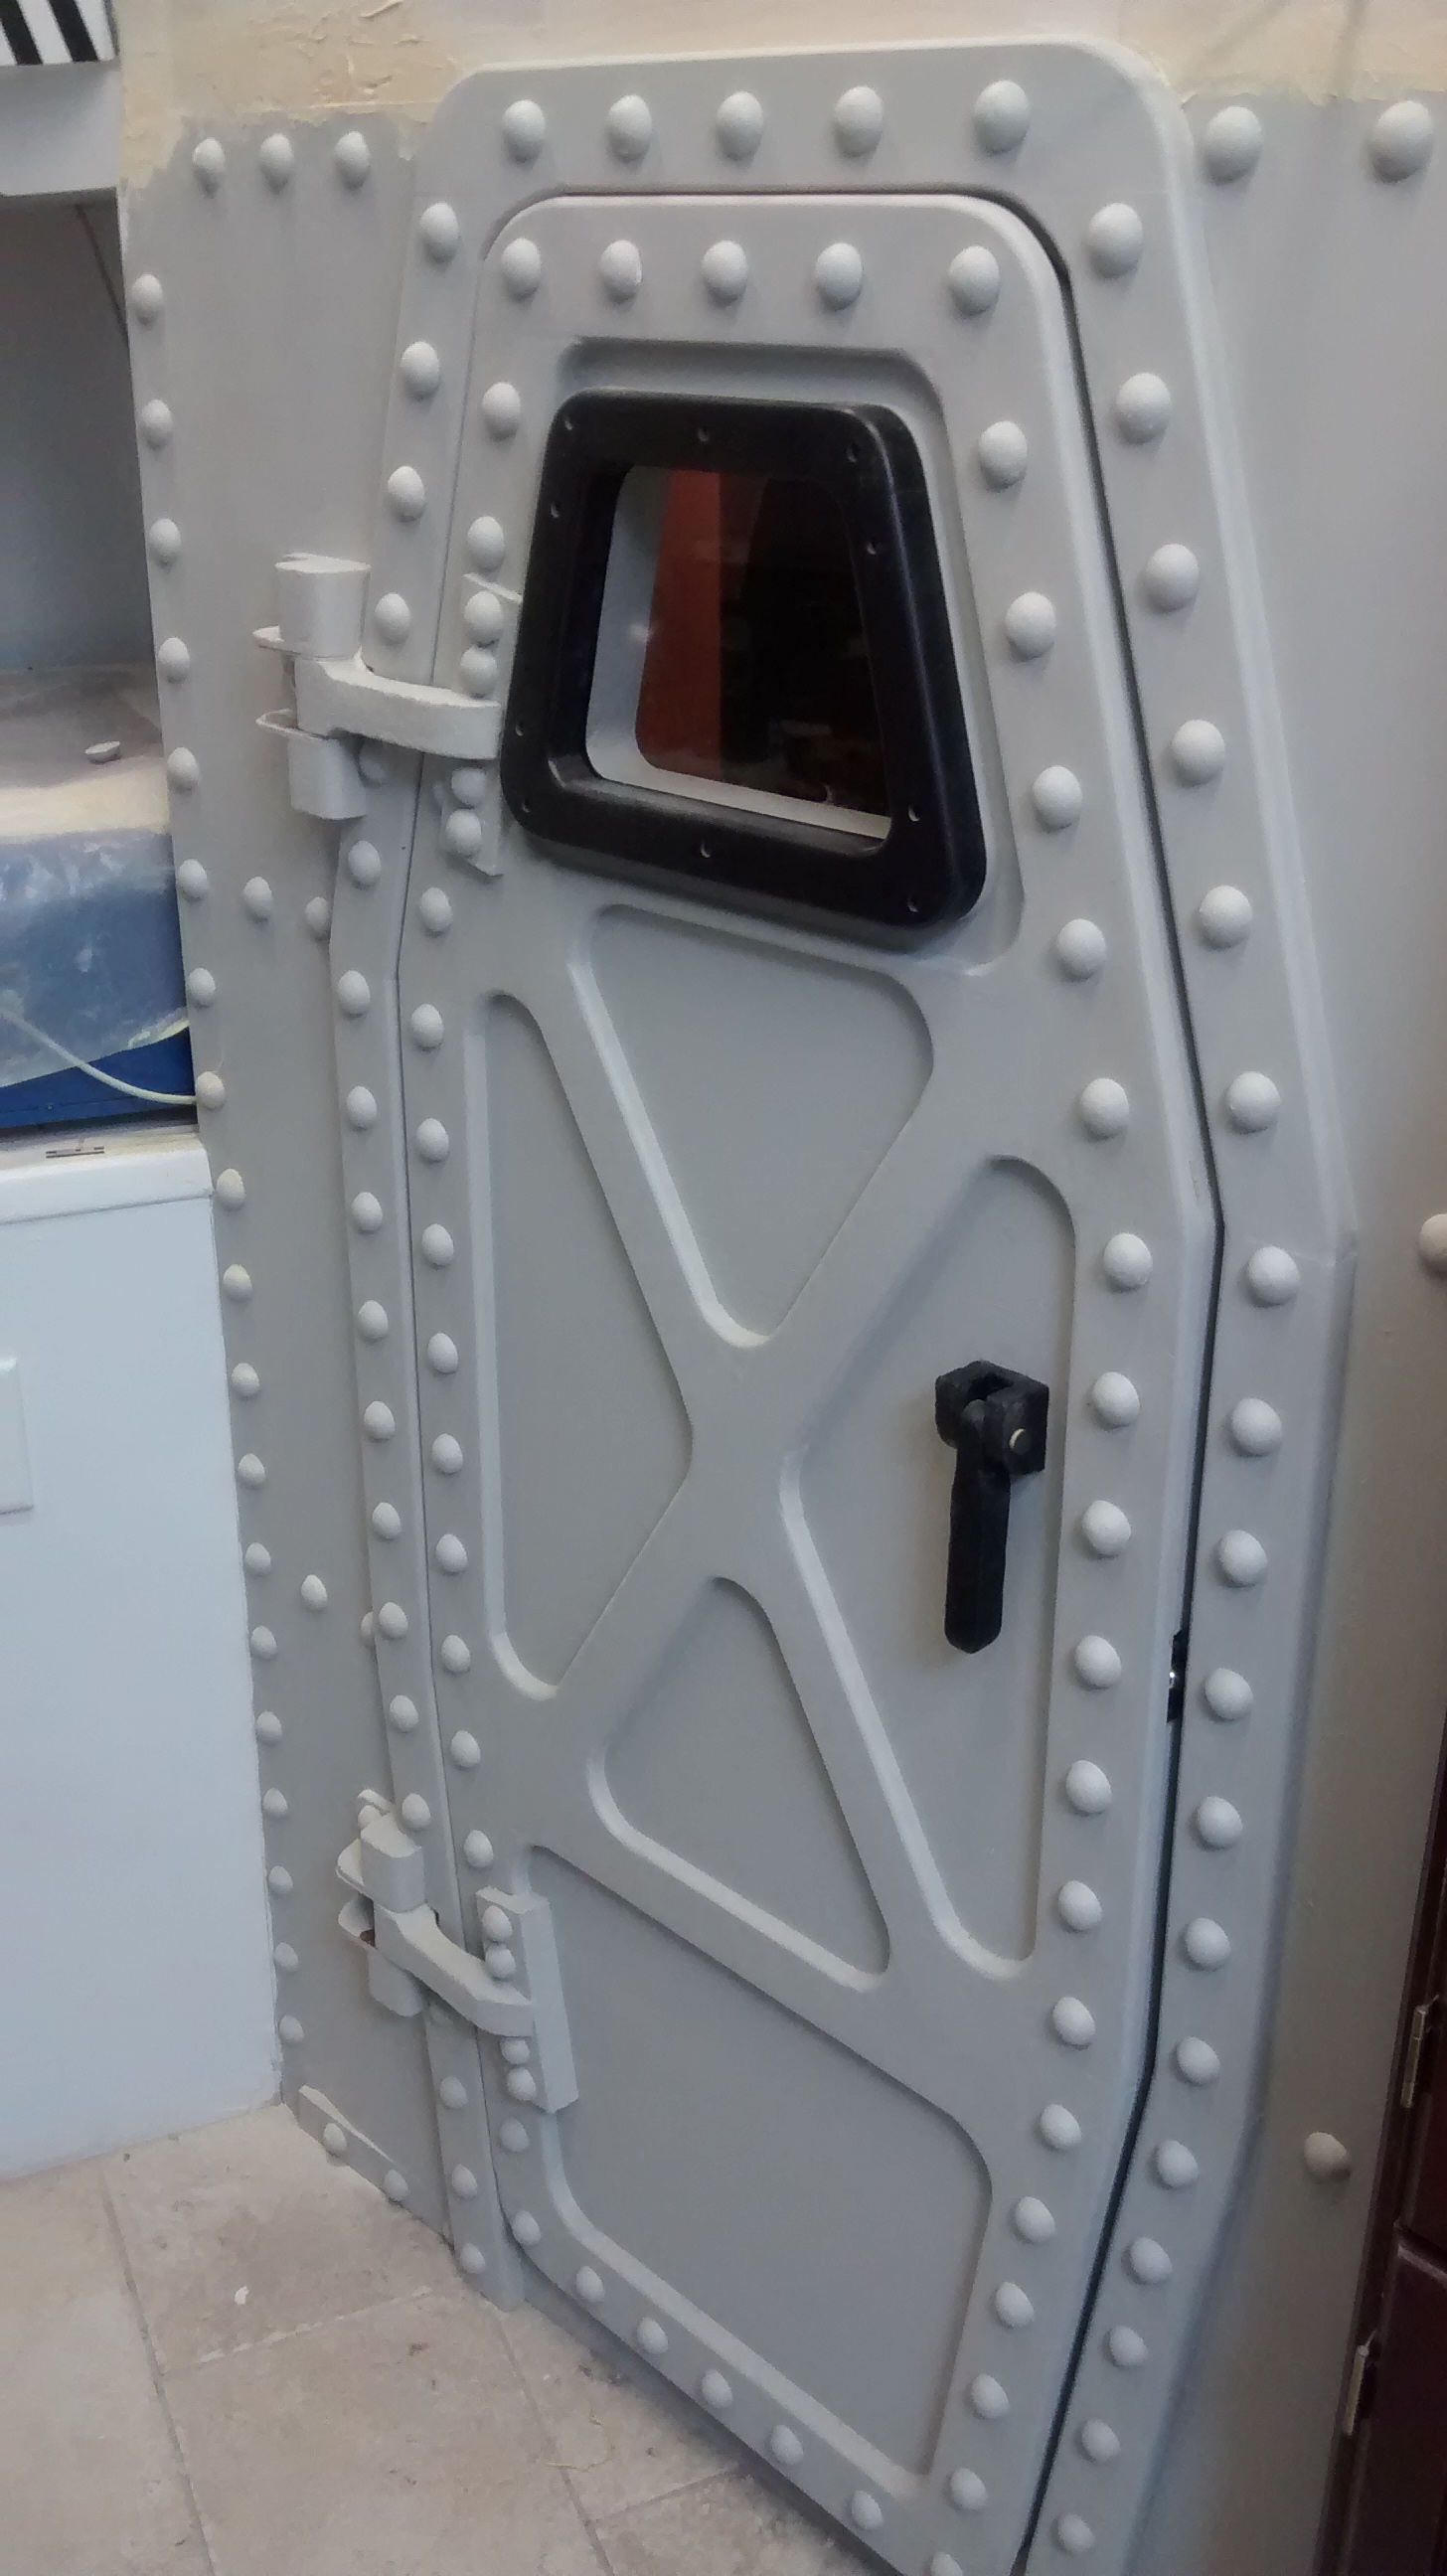 How to make a Submarine or Spaceship Door from an old house door.